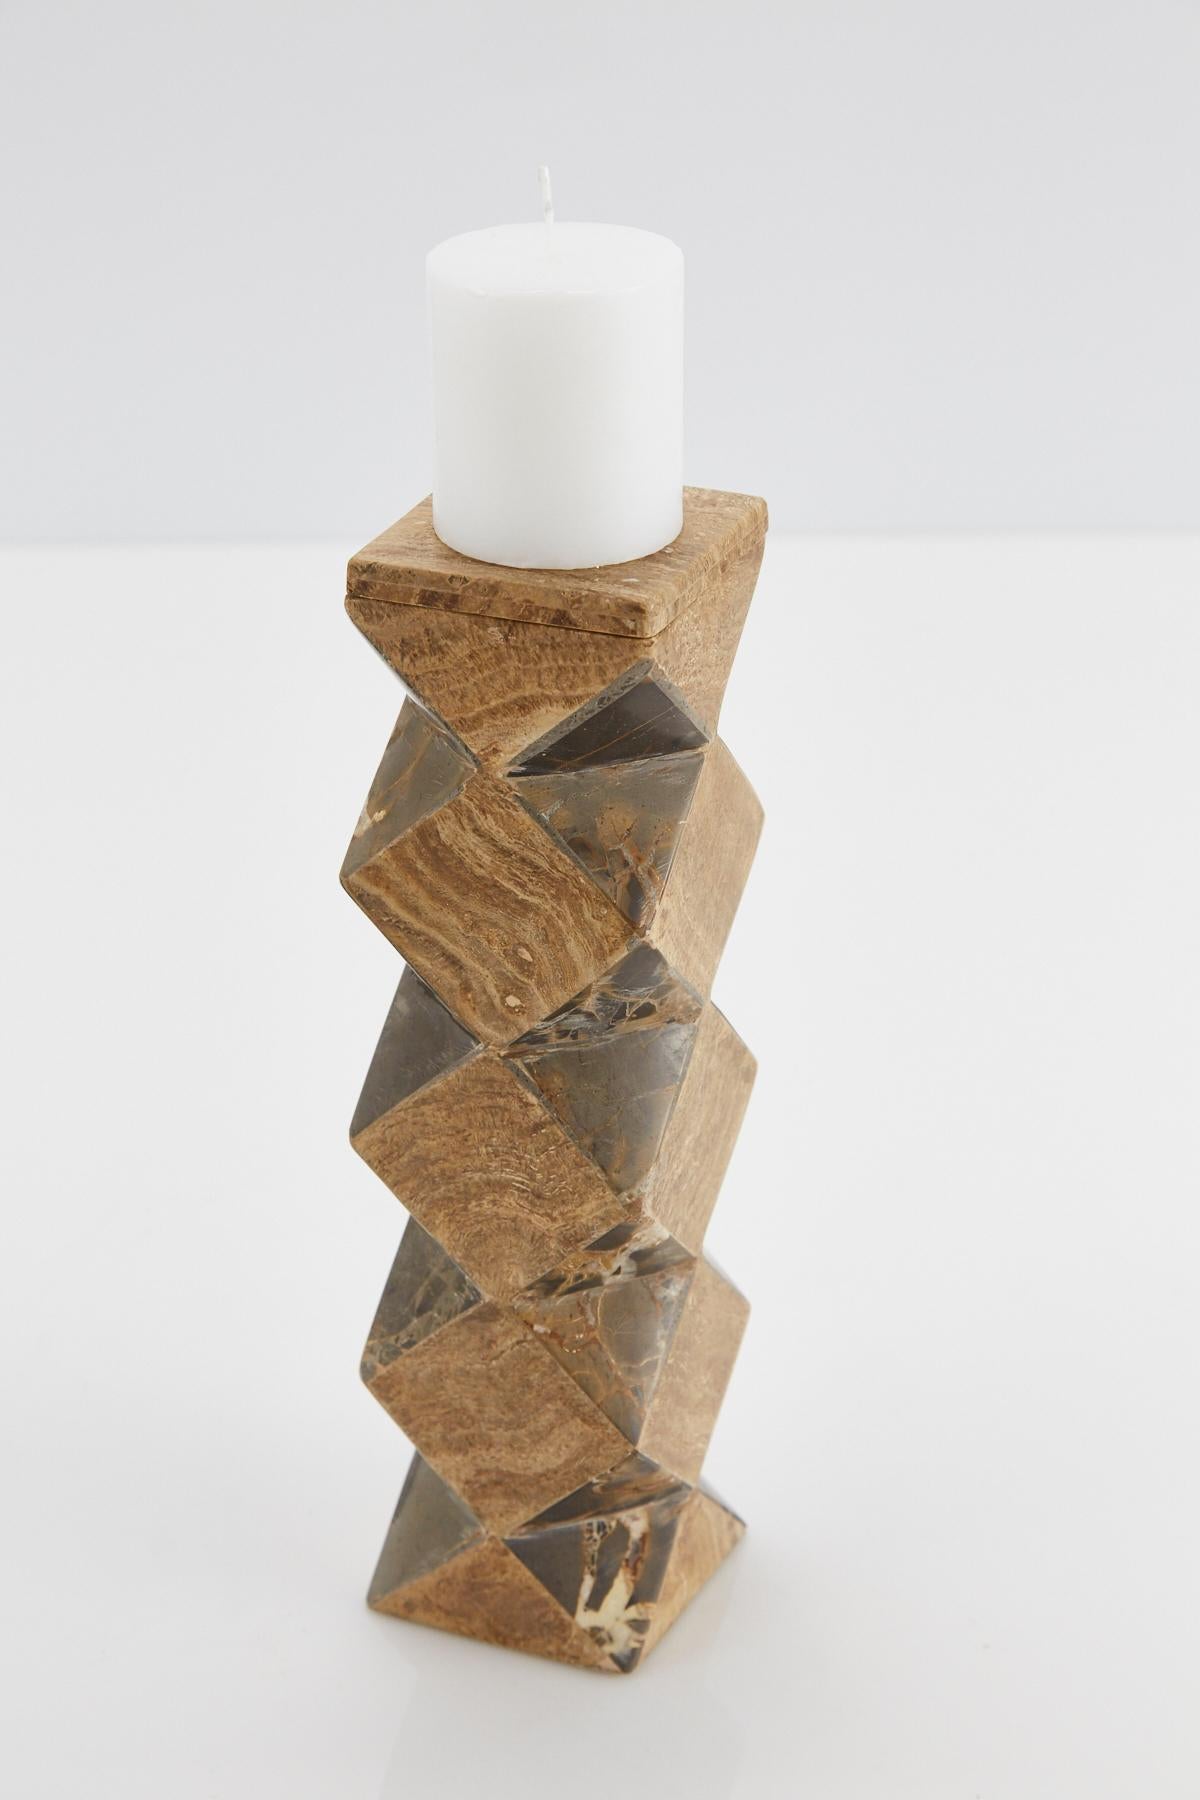 Medium-sized pillar candleholder. Body is comprised of a rectilinear cube with faceted sides, alternating snakeskin stone and beige tessellated stone. The top of this convertible candlestick is removable and can then be used as a vase.

Coordinating